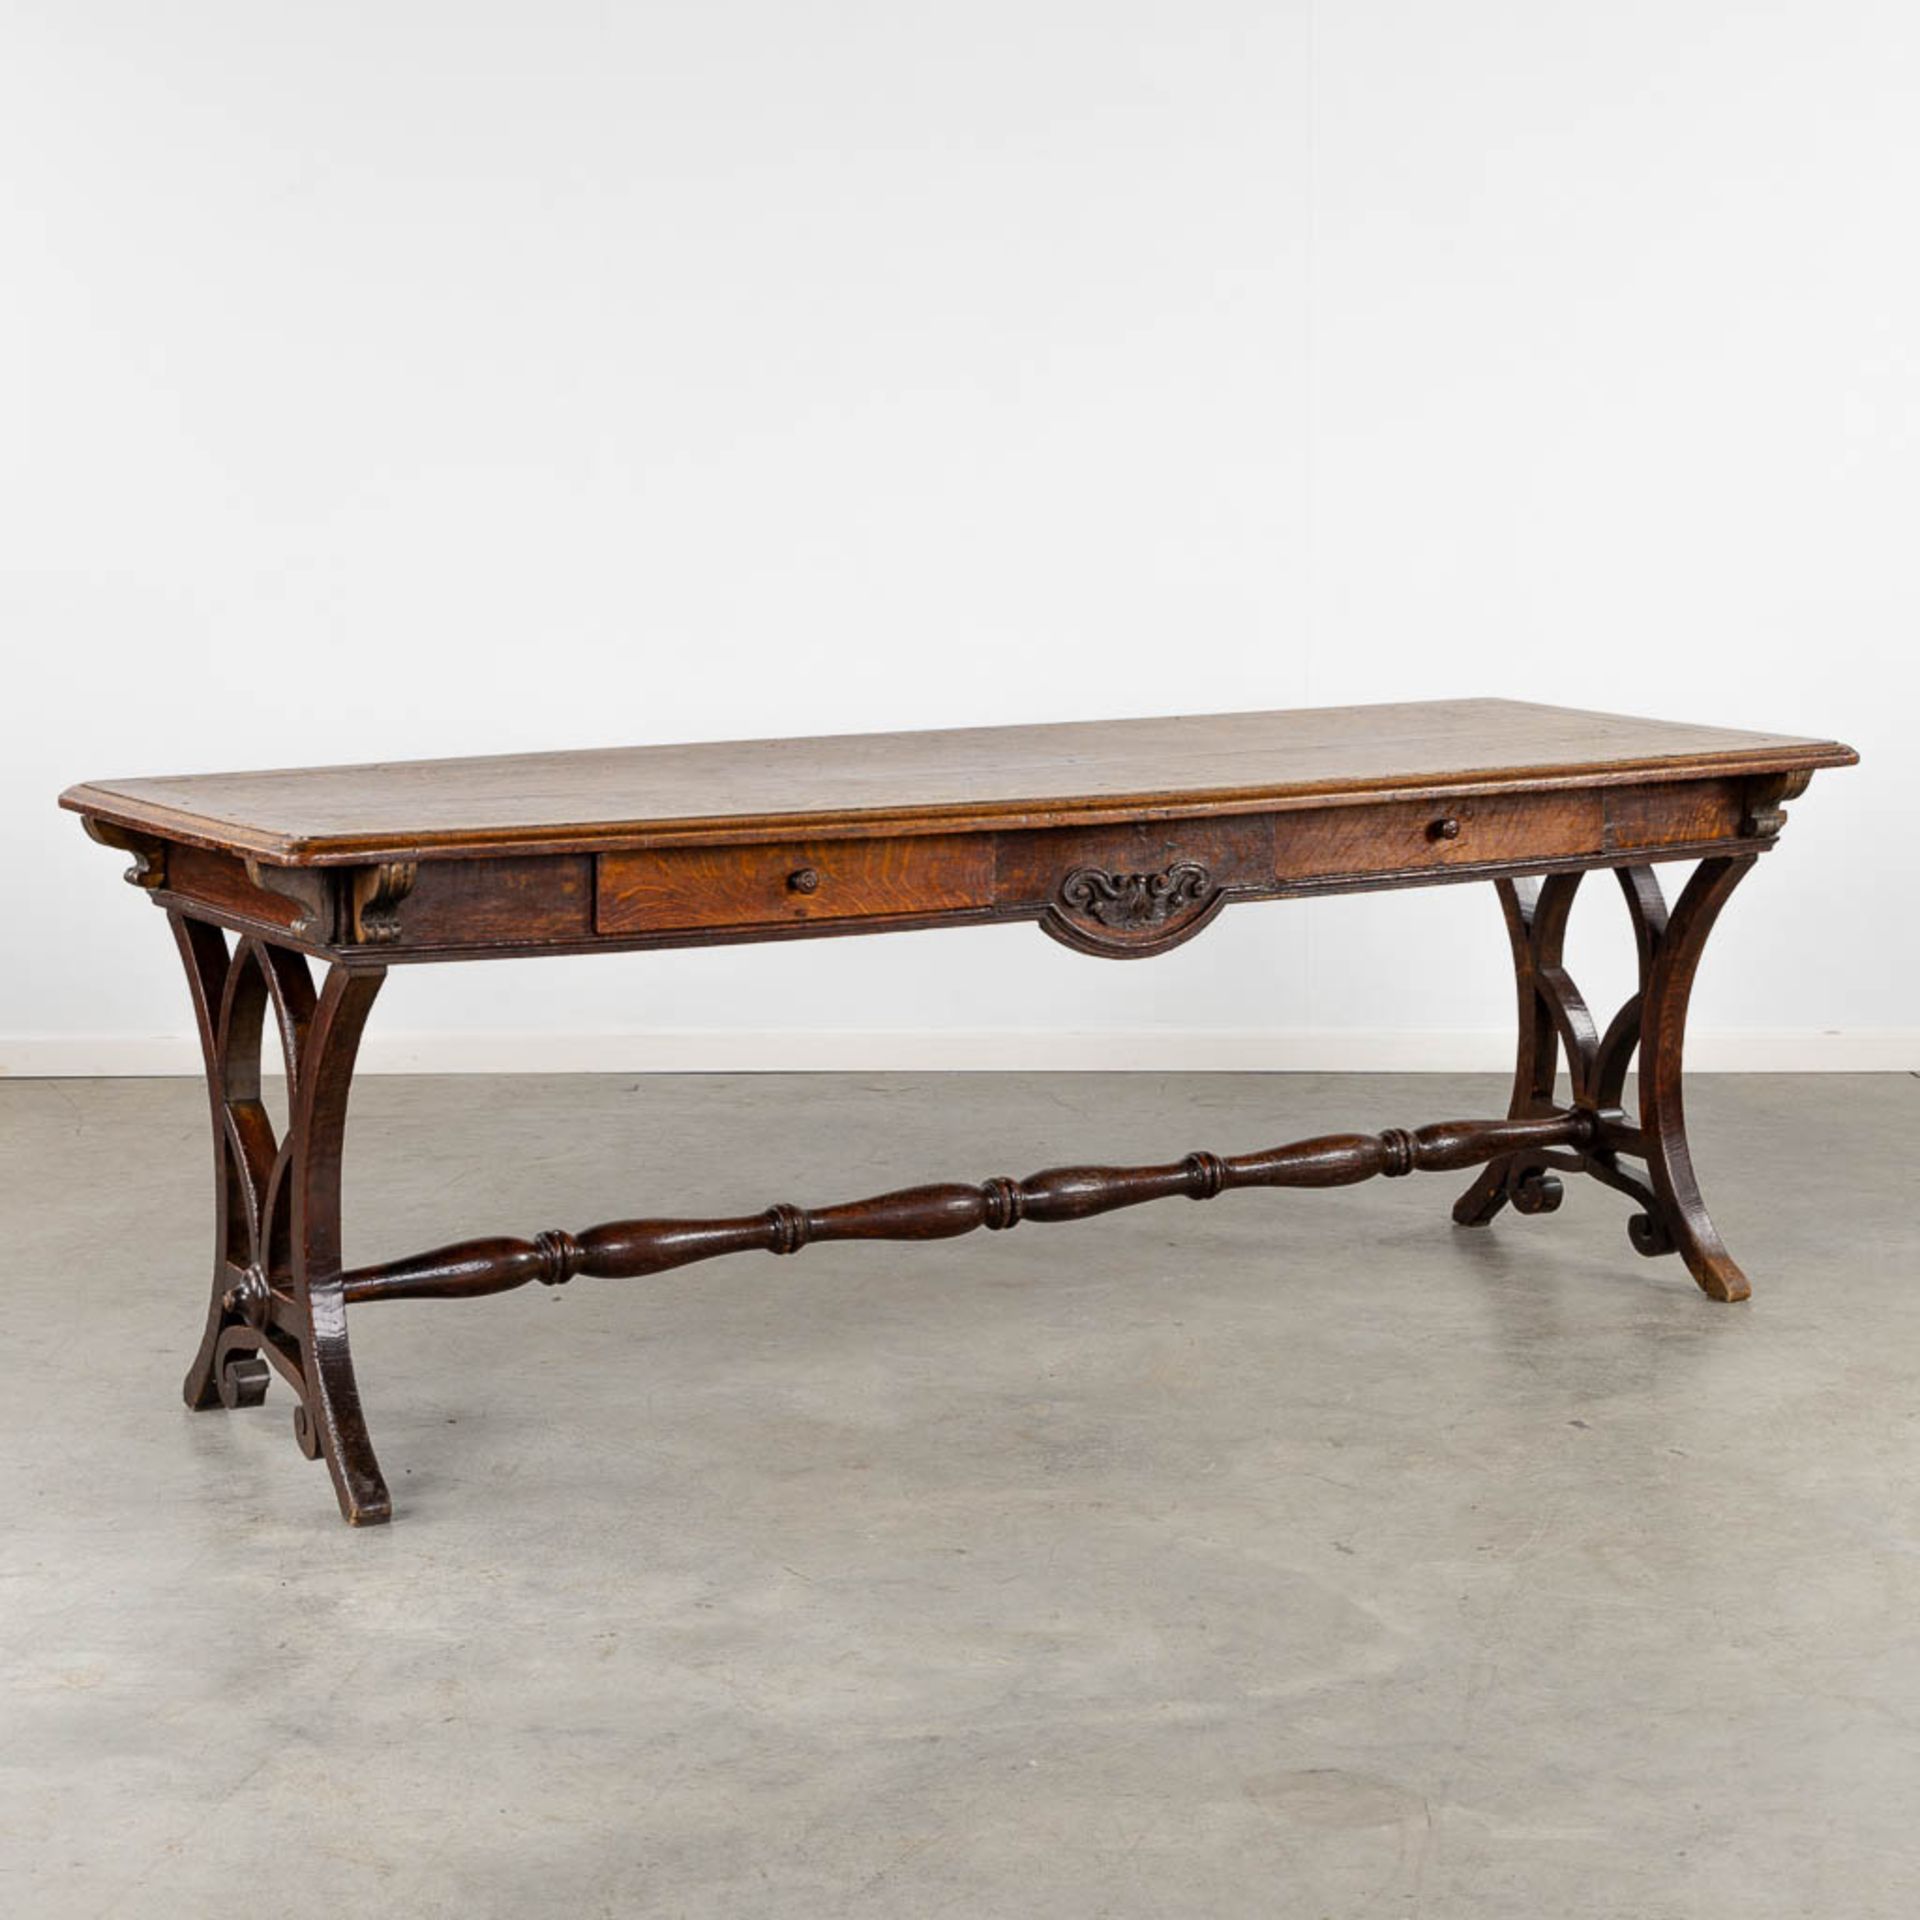 An antique desk/table with sculptures and a drawer, oak. 19th C. (L:77 x W:217 x H:76 cm)